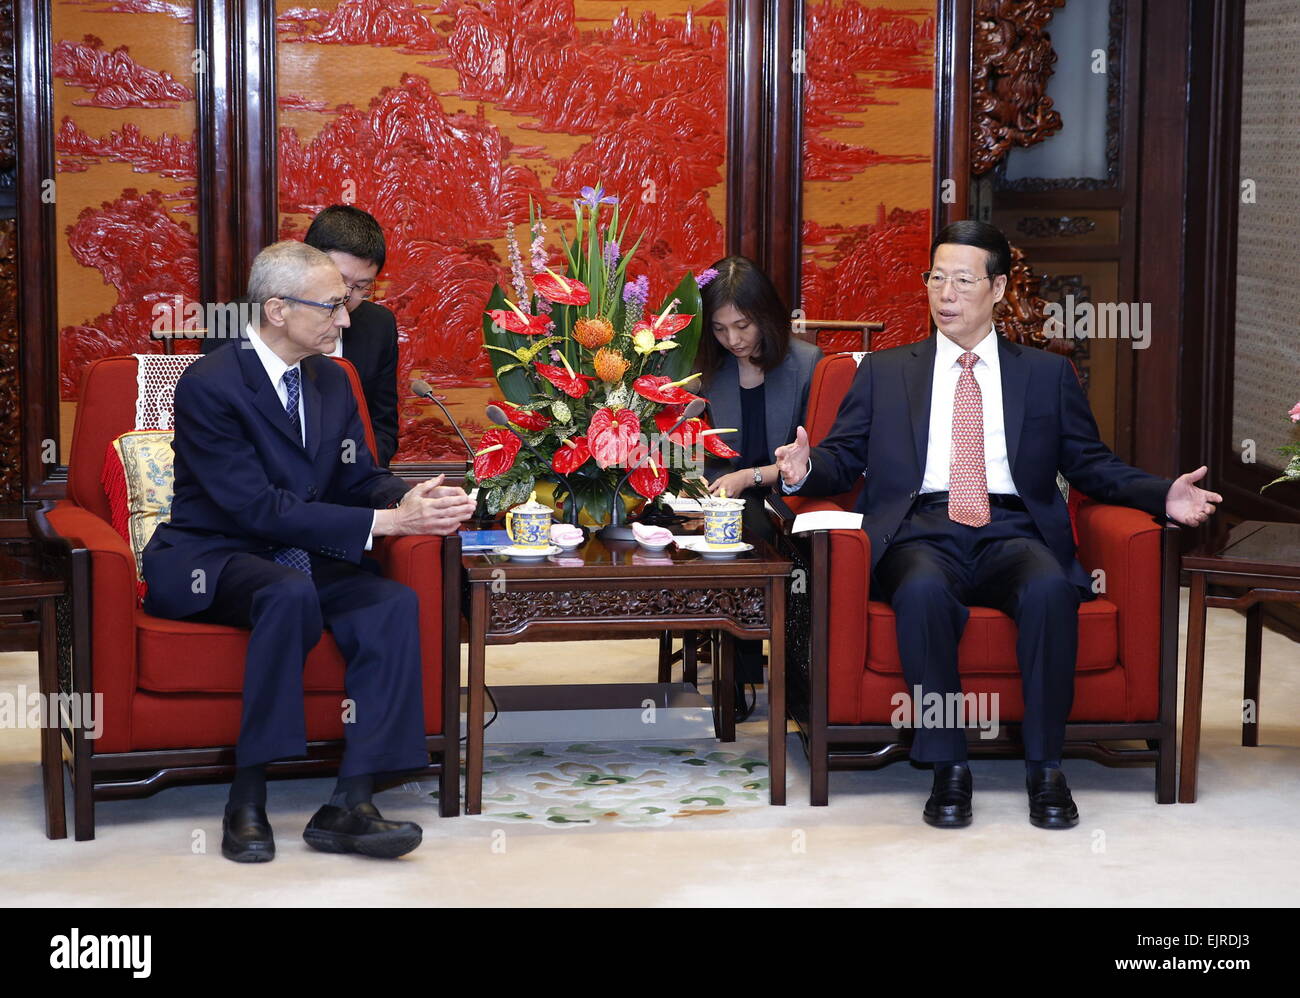 Beijing, China. 31st Mar, 2015. Chinese Vice Premier Zhang Gaoli (R) meets with a delegation from the the Center for American Progress(CAP) of the United States led by John Podesta (L), founder of the CAP and former chief of staff to then U.S. President Bill Clinton, in Beijing, capital of China, March 31, 2015. © Ju Peng/Xinhua/Alamy Live News Stock Photo